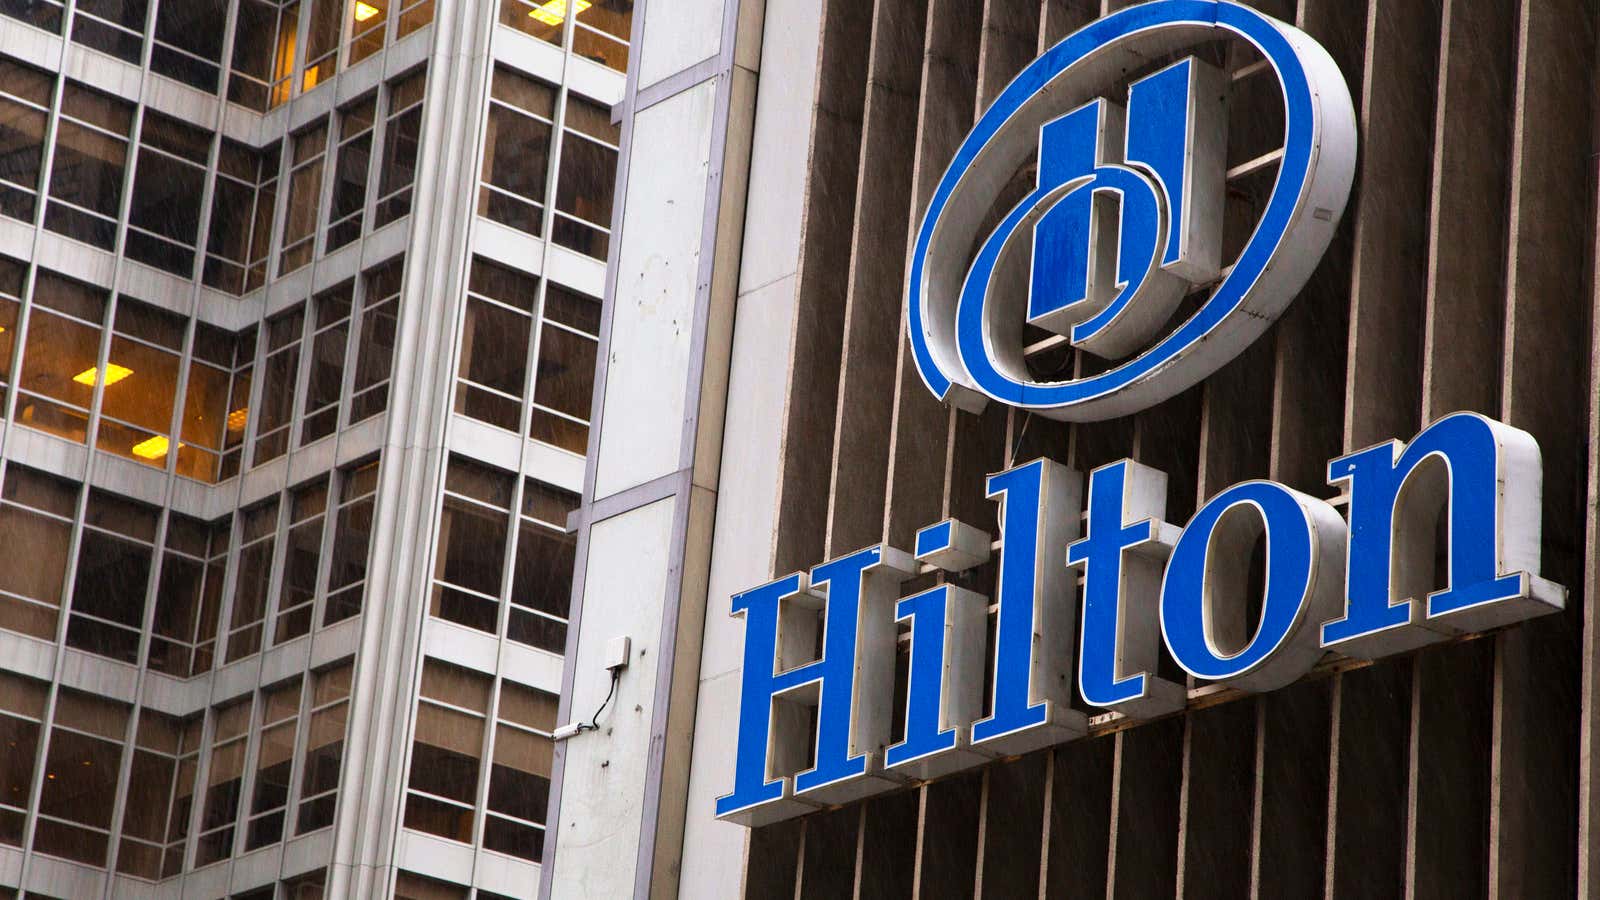 Hilton’s value is in its brand, not its buildings